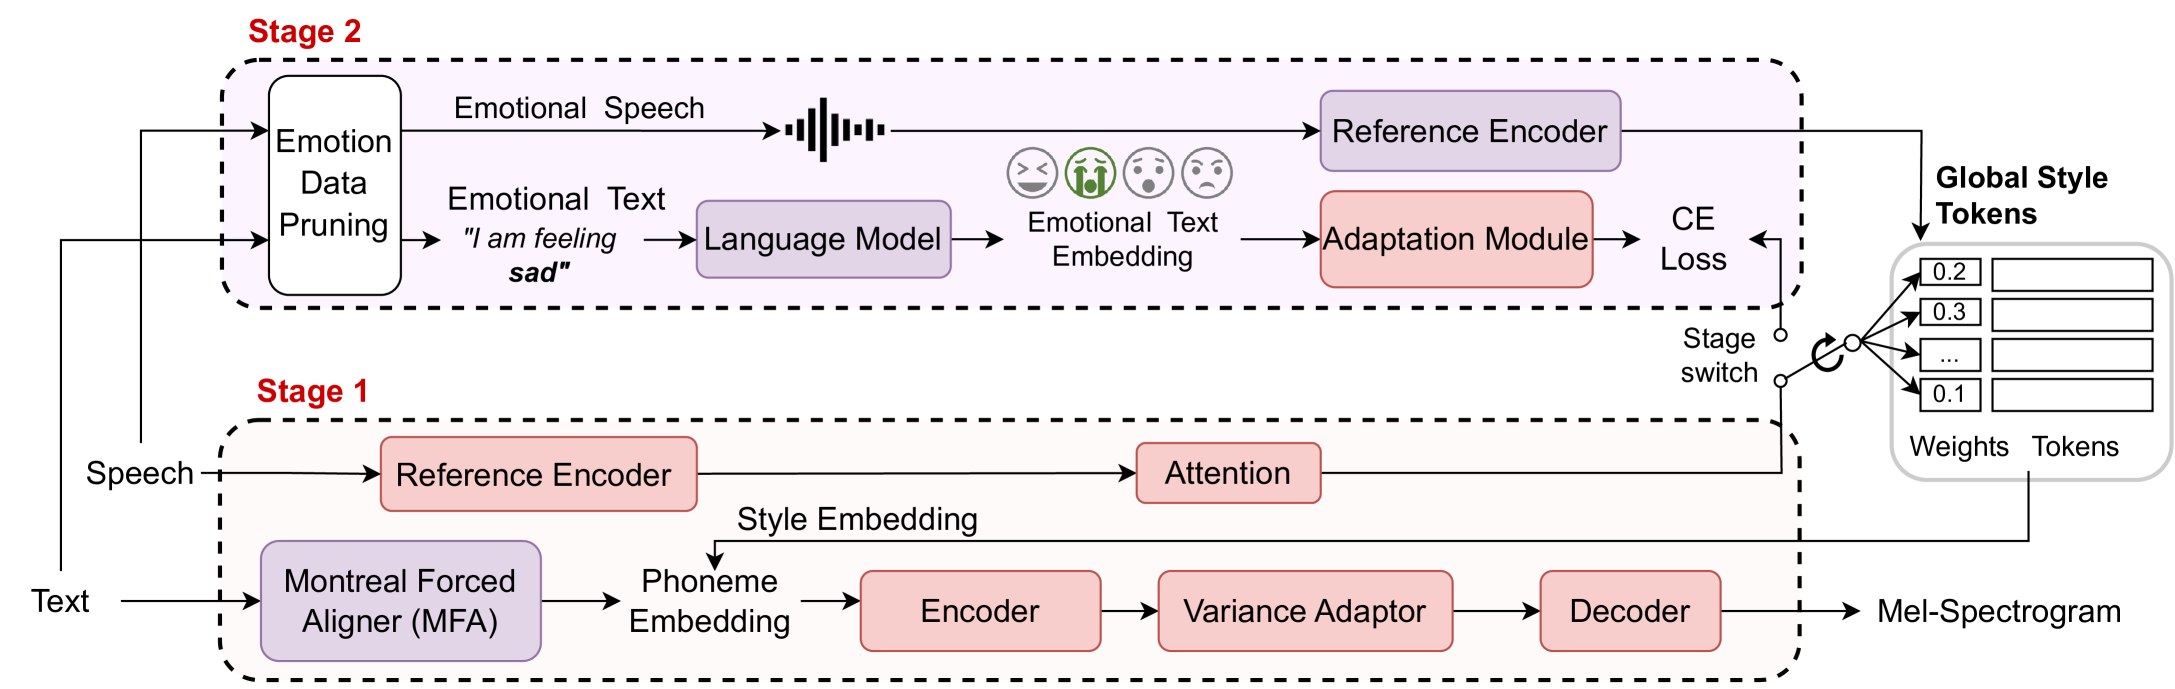 Exploring speech style spaces with language models: Emotional TTS without emotion labels